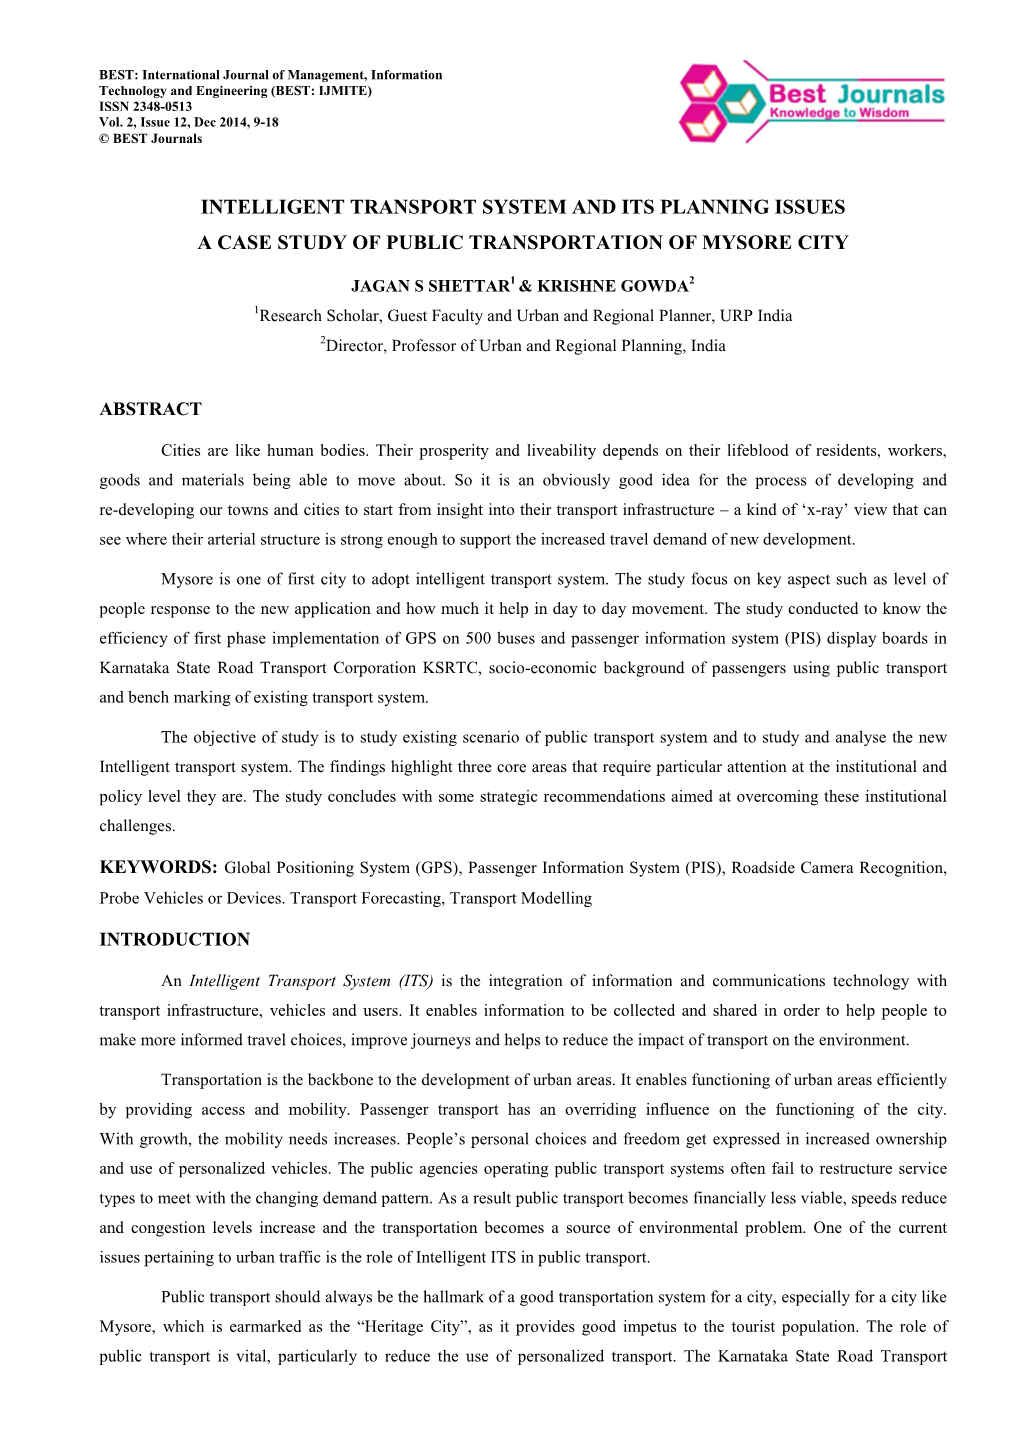 Intelligent Transport System and Its Planning Issues a Case Study of Public Transportation of Mysore City